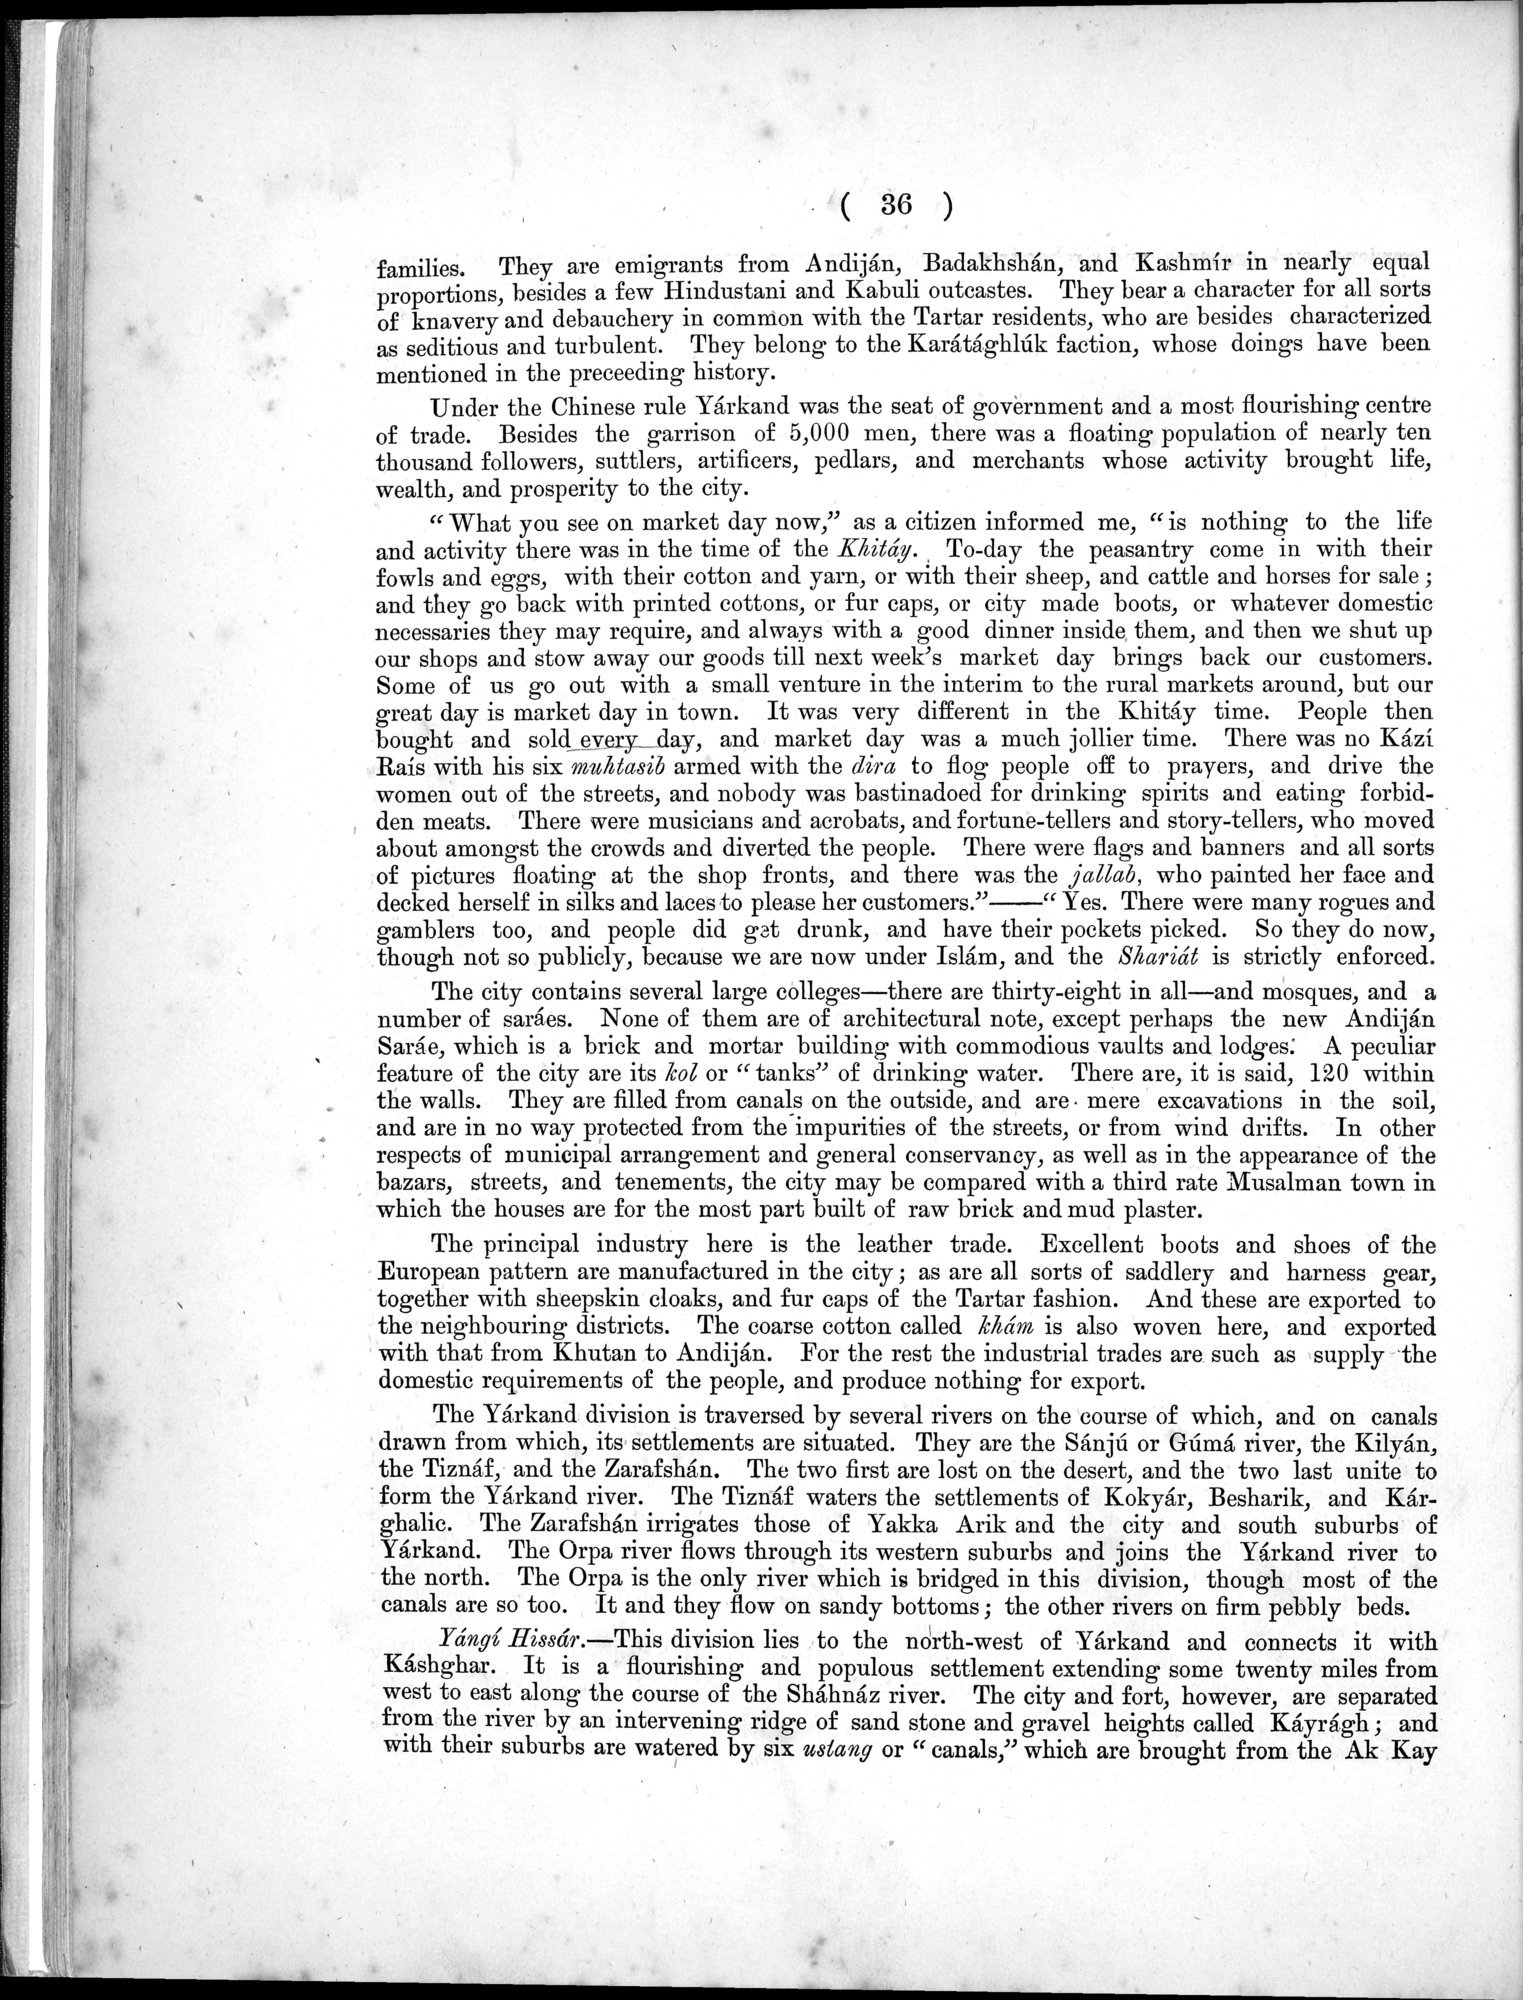 Report of a Mission to Yarkund in 1873 : vol.1 / Page 70 (Grayscale High Resolution Image)